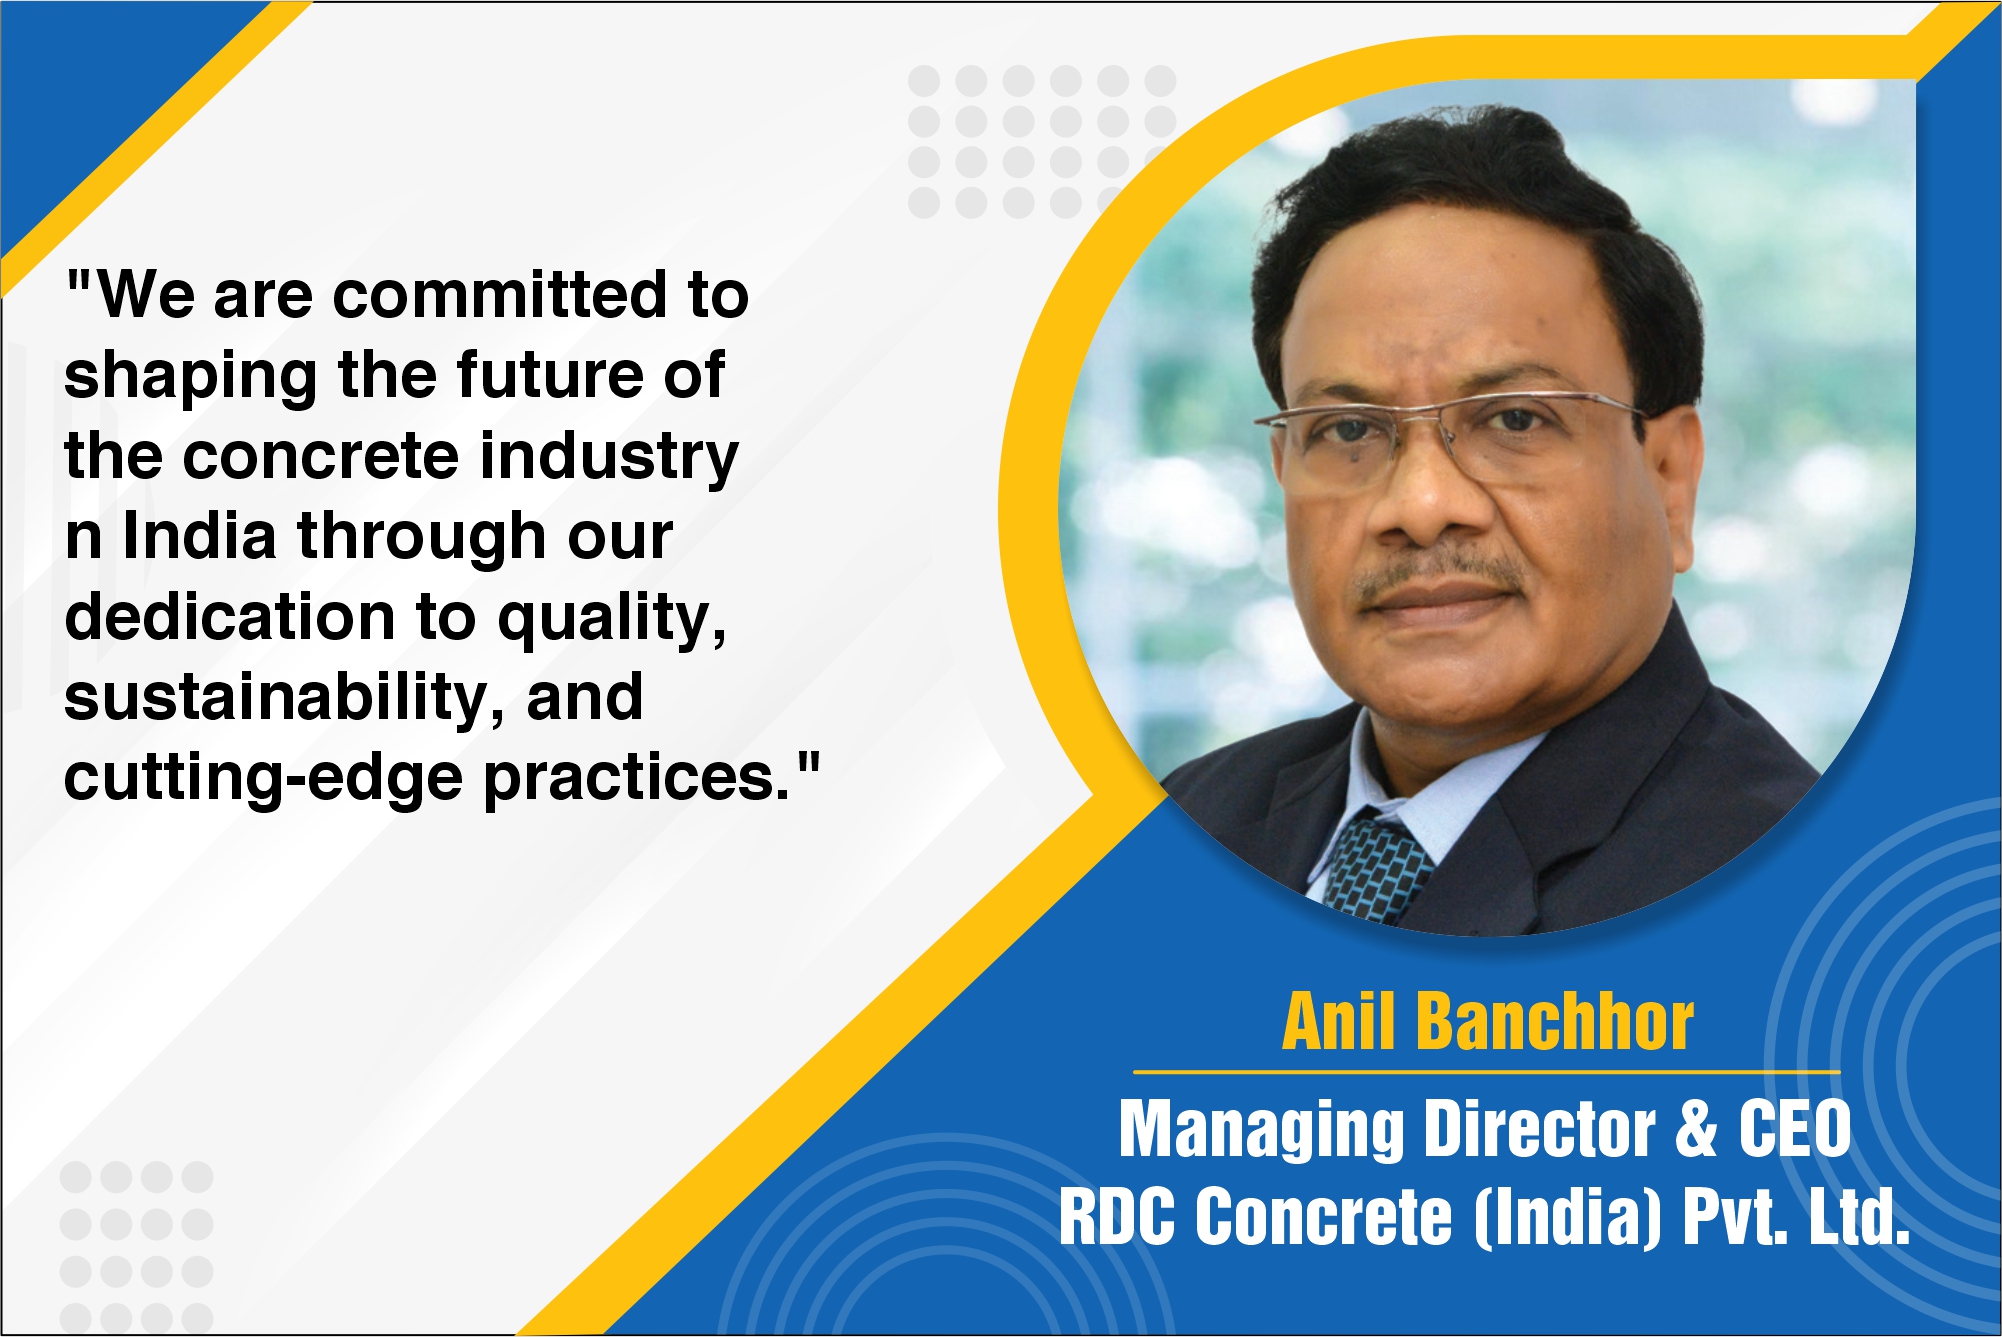 RDC Concrete offers ground-breaking sustainable innovations for better concrete